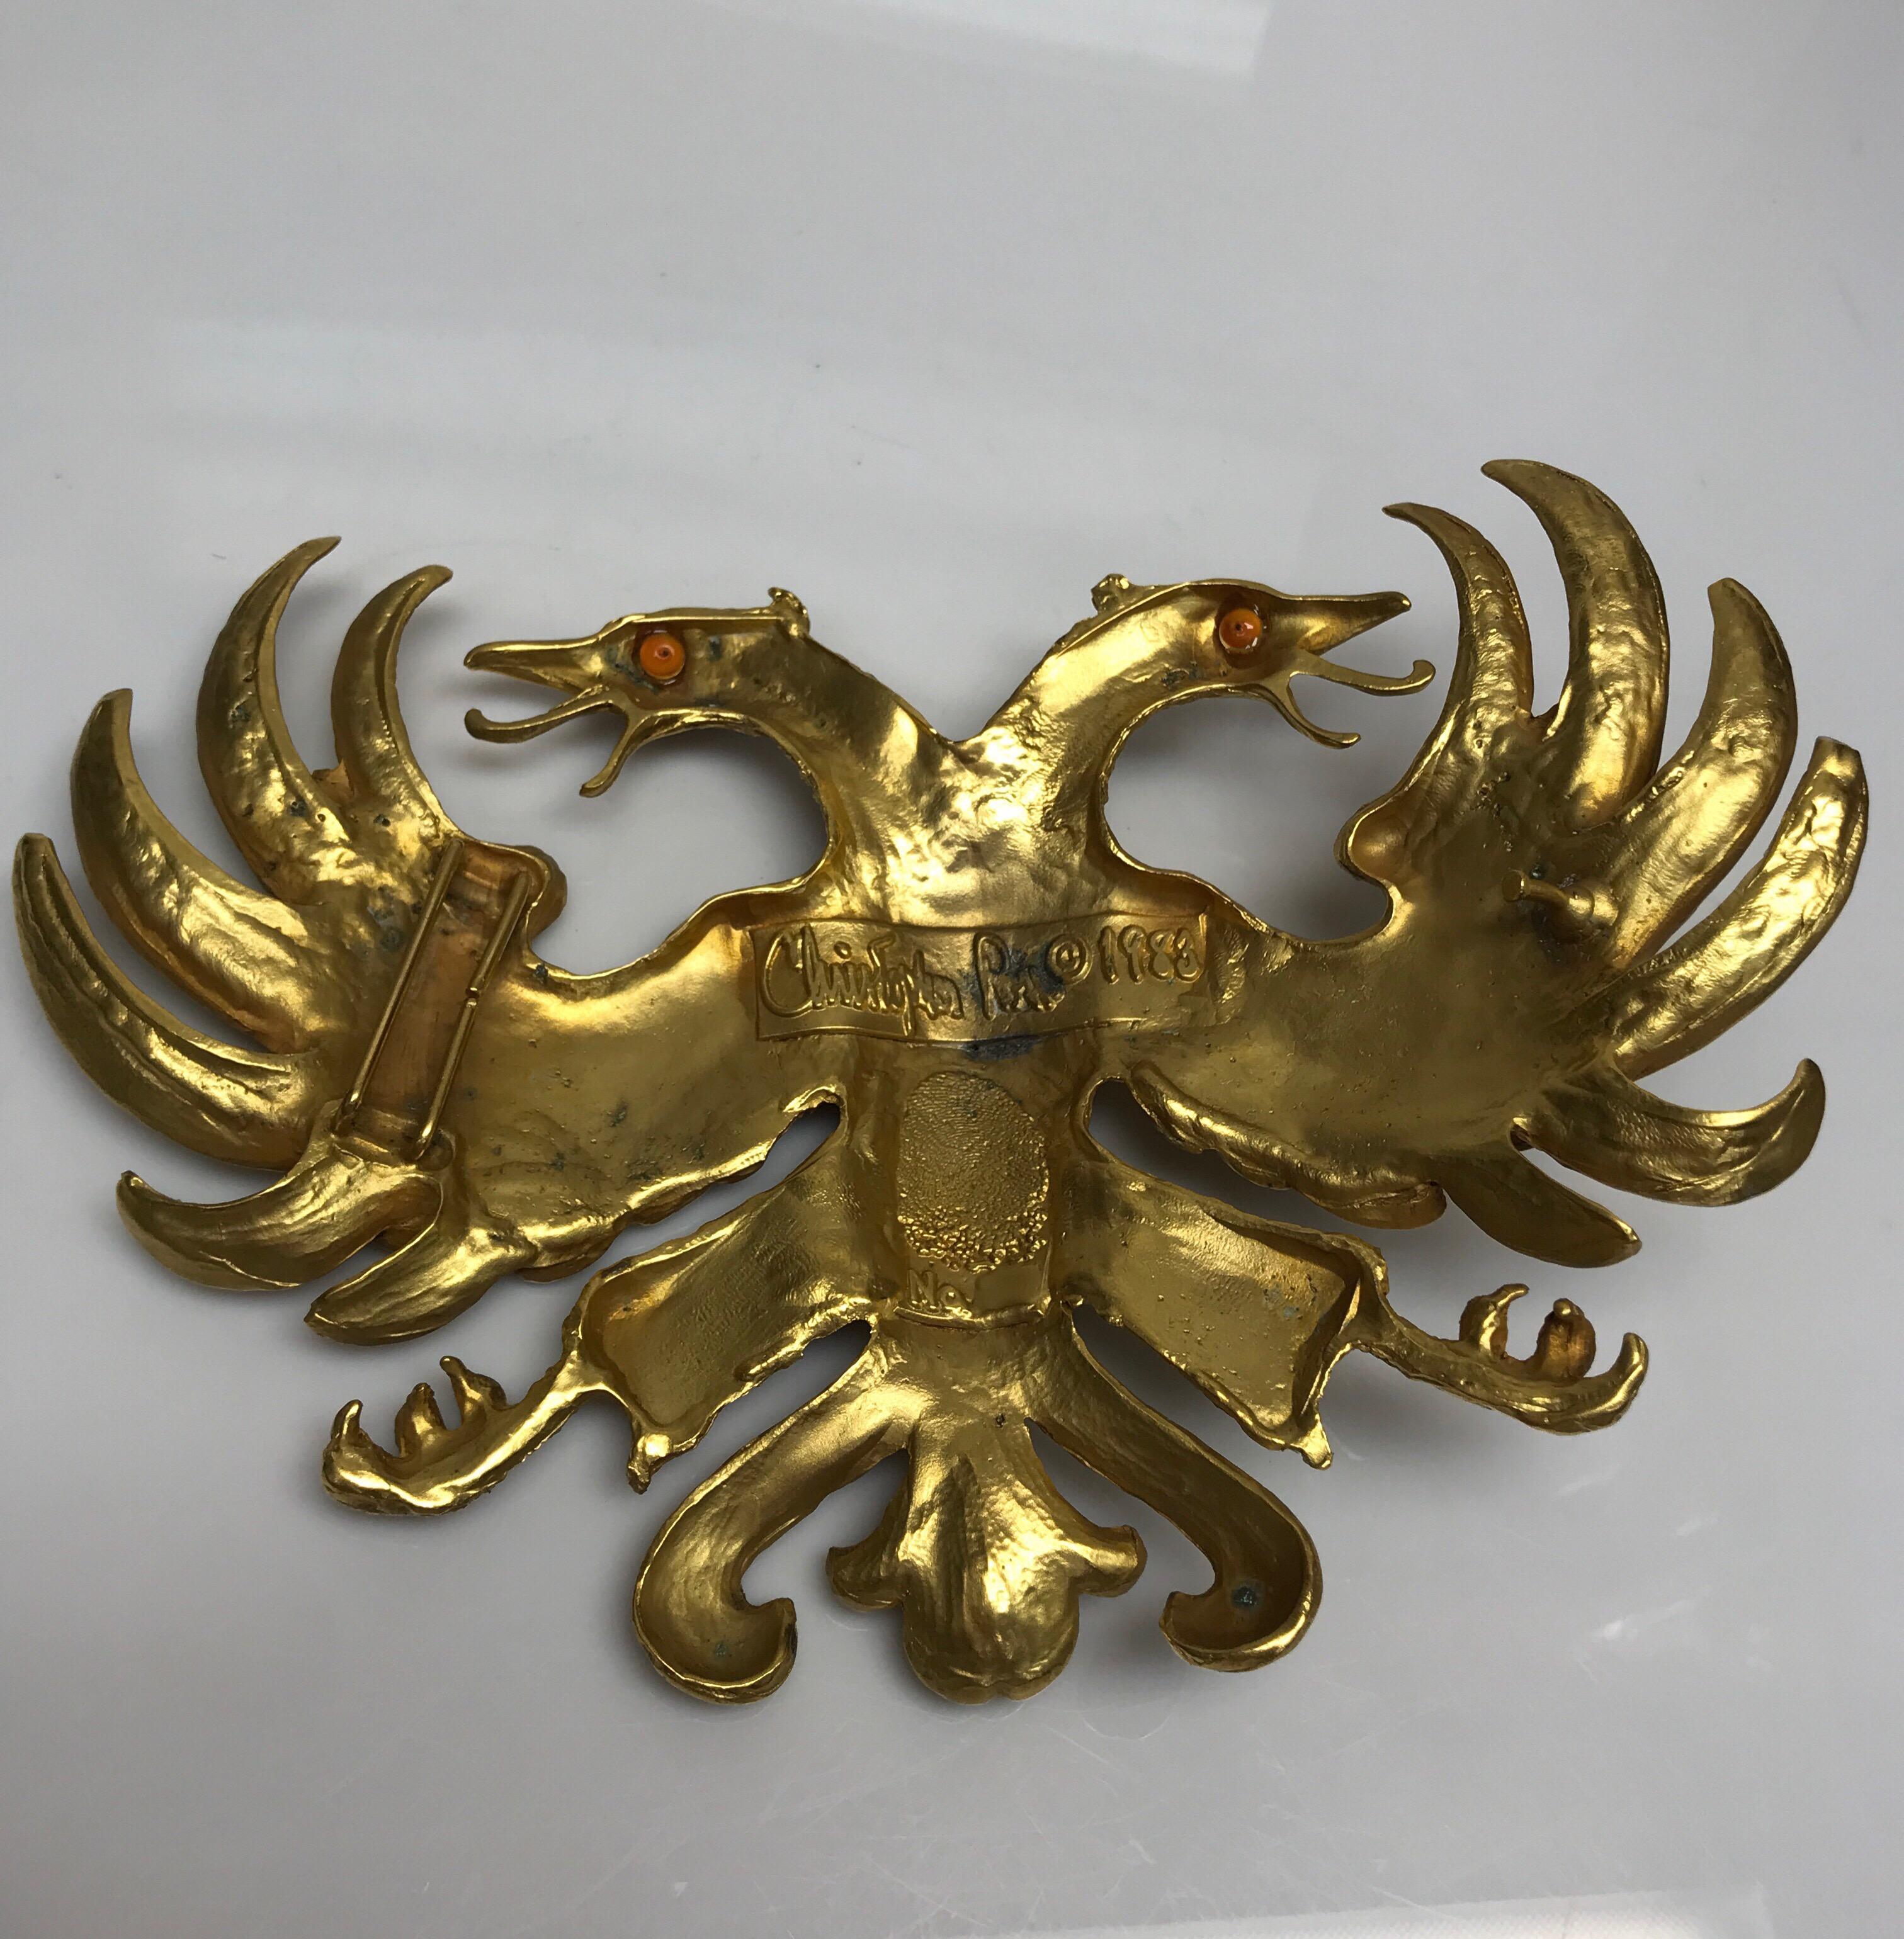 Christopher Ross Gold Large Double Bird Buckles 1983. This vintage Christopher Ross belt buckle is in good condition. The gold shows chips or wear throughout, as shown in pictures. This piece is two large birds with a large wingspan. Belt is sold